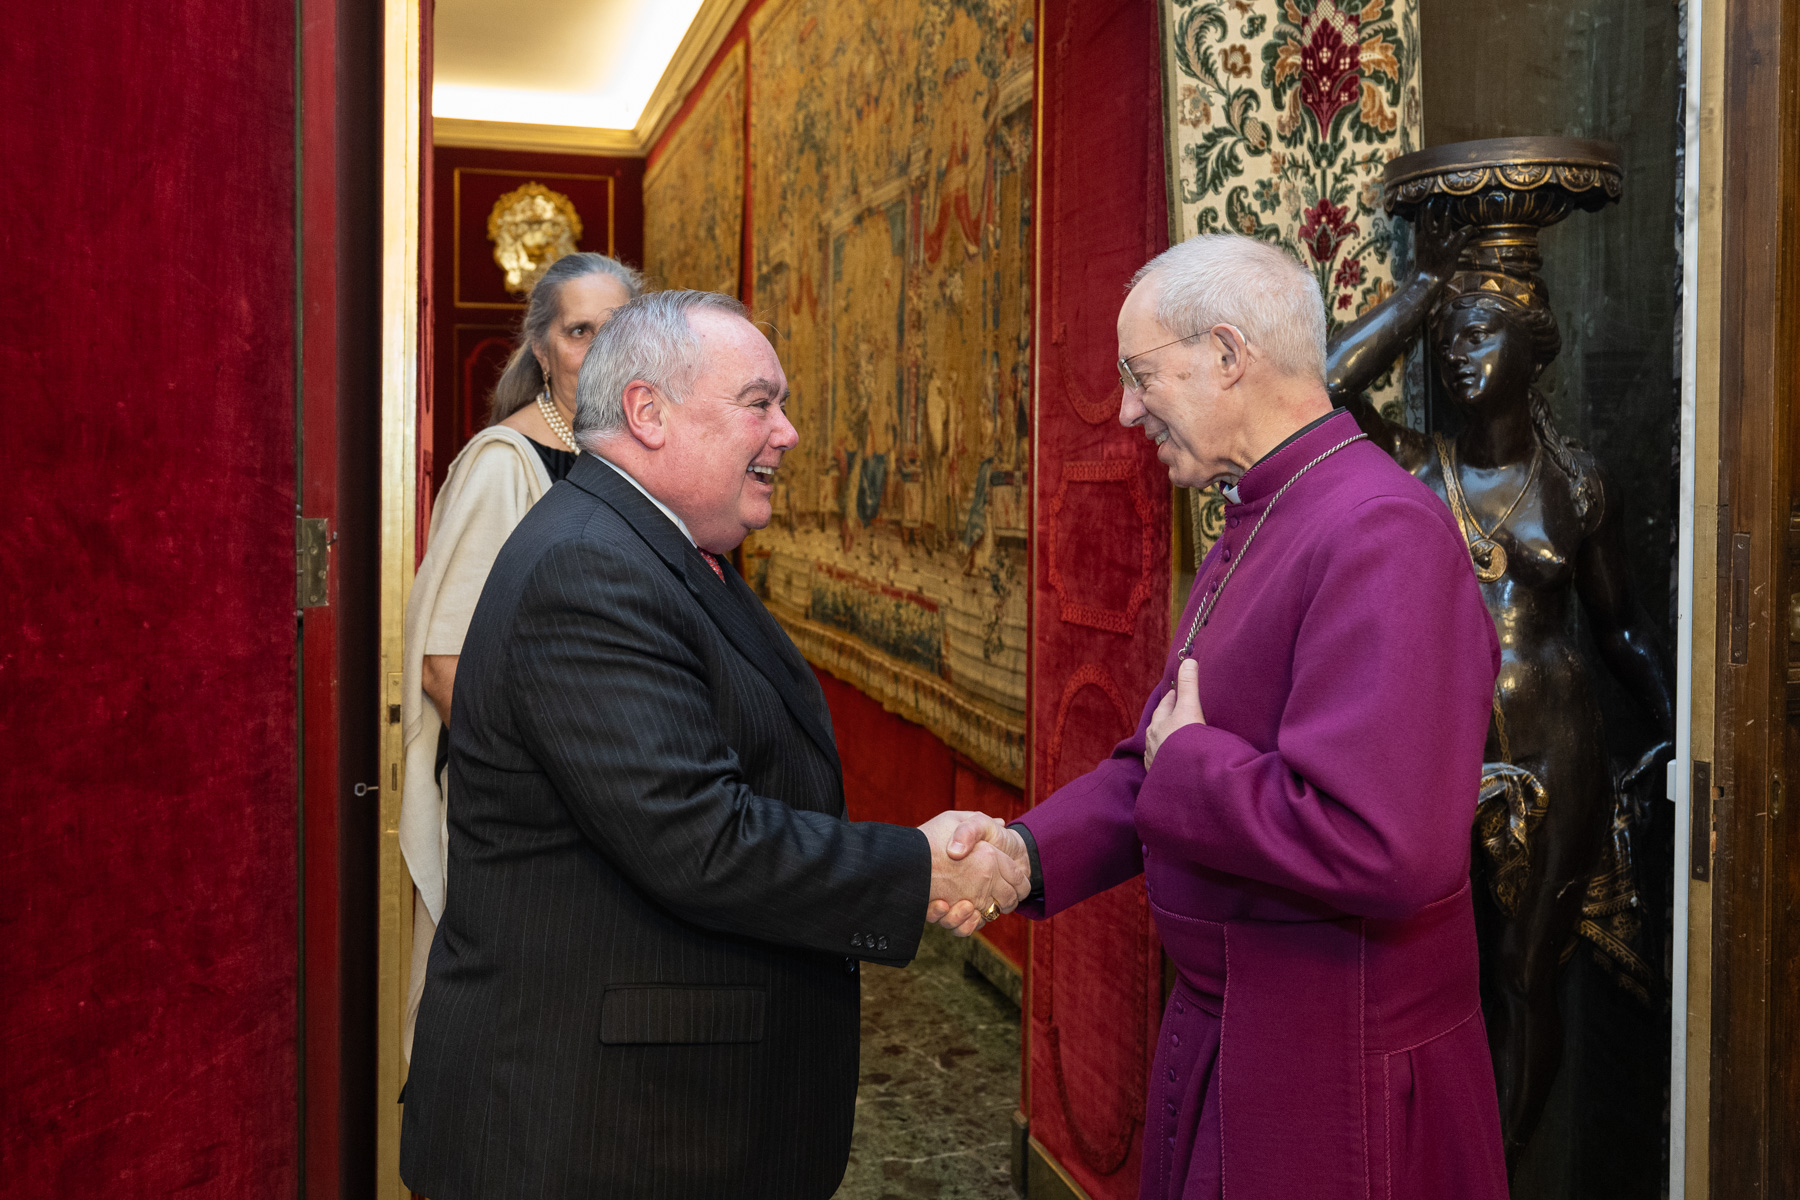 Grand Master Fra’ John Dunlap receives delegation of bishops headed by Archbishop of Canterbury Justin Welby